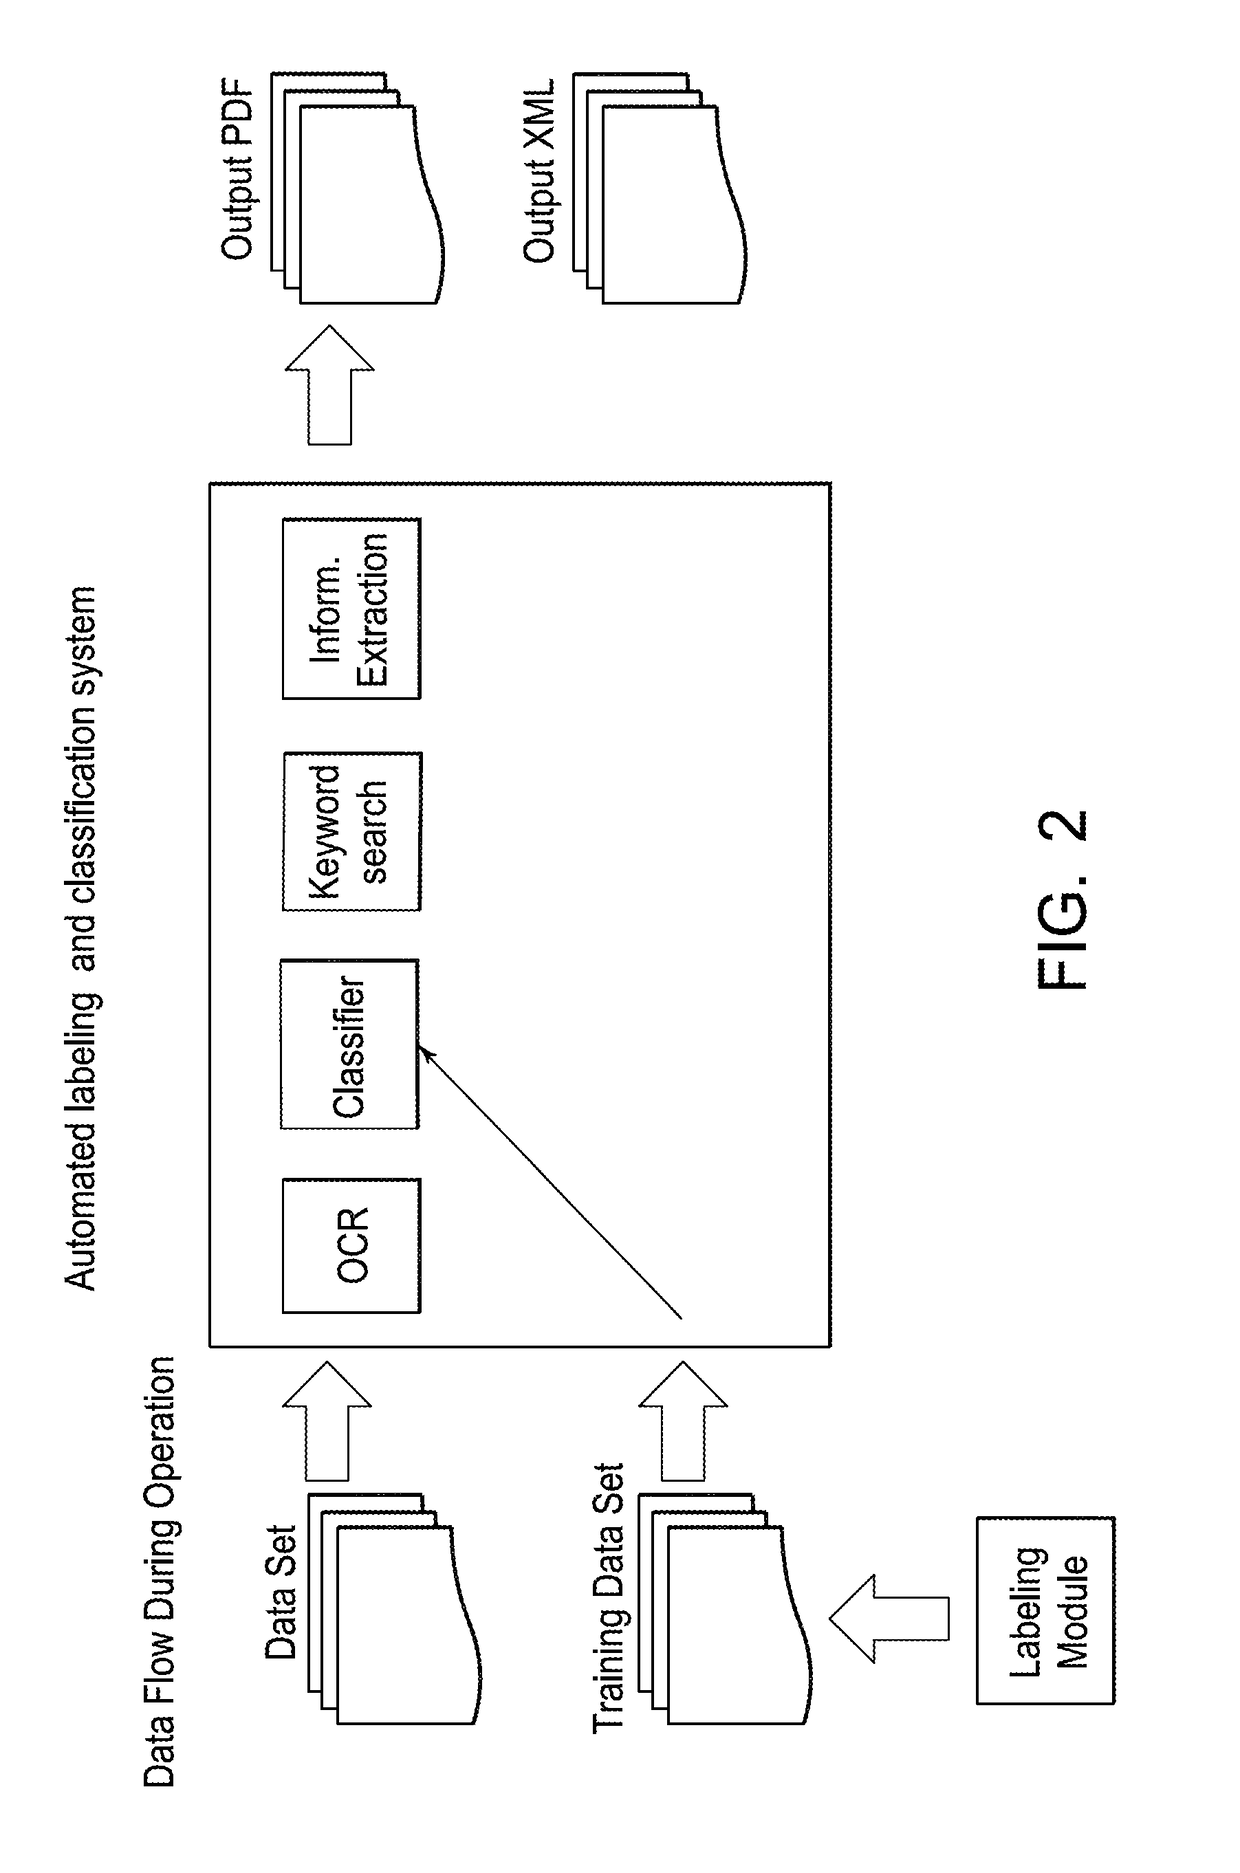 Data extraction engine for structured, semi-structured and unstructured data with automated labeling and classification of data patterns or data elements therein, and corresponding method thereof